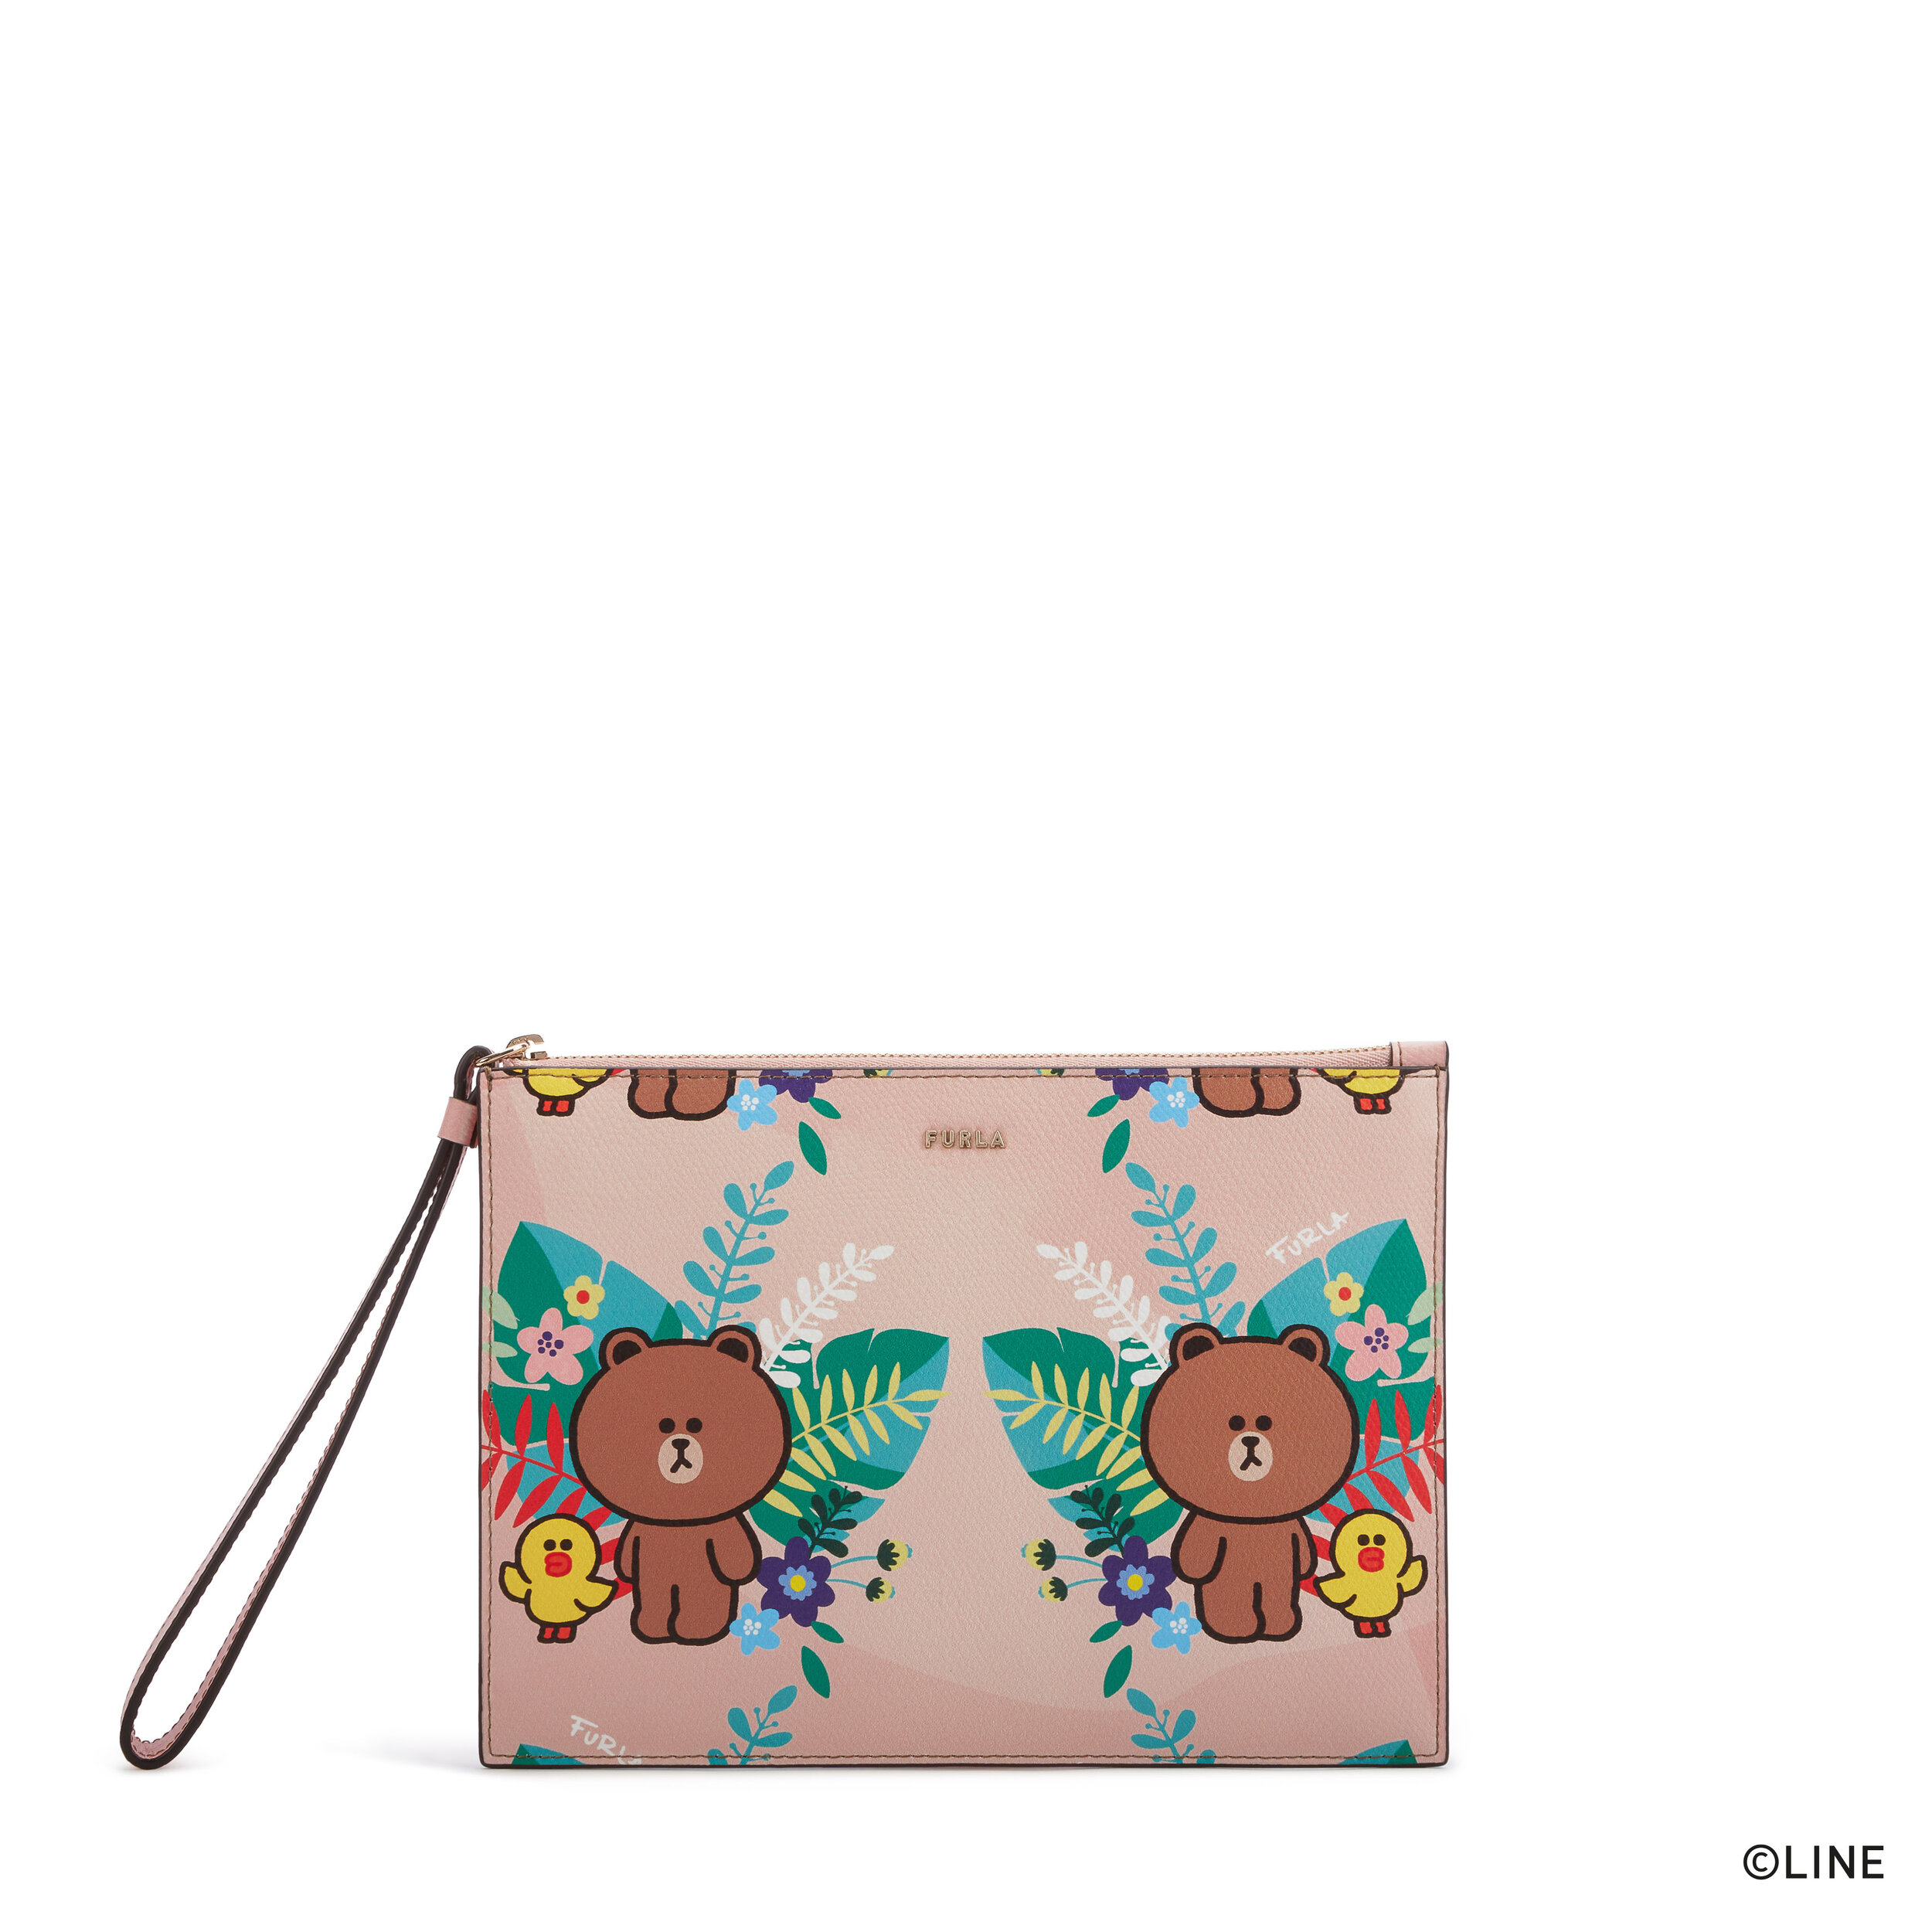 FURLA LINE FRIENDS S ENVELOPE_DAY PRINT ON ARES TEXTURED LEATHER_LF-copyright.jpg